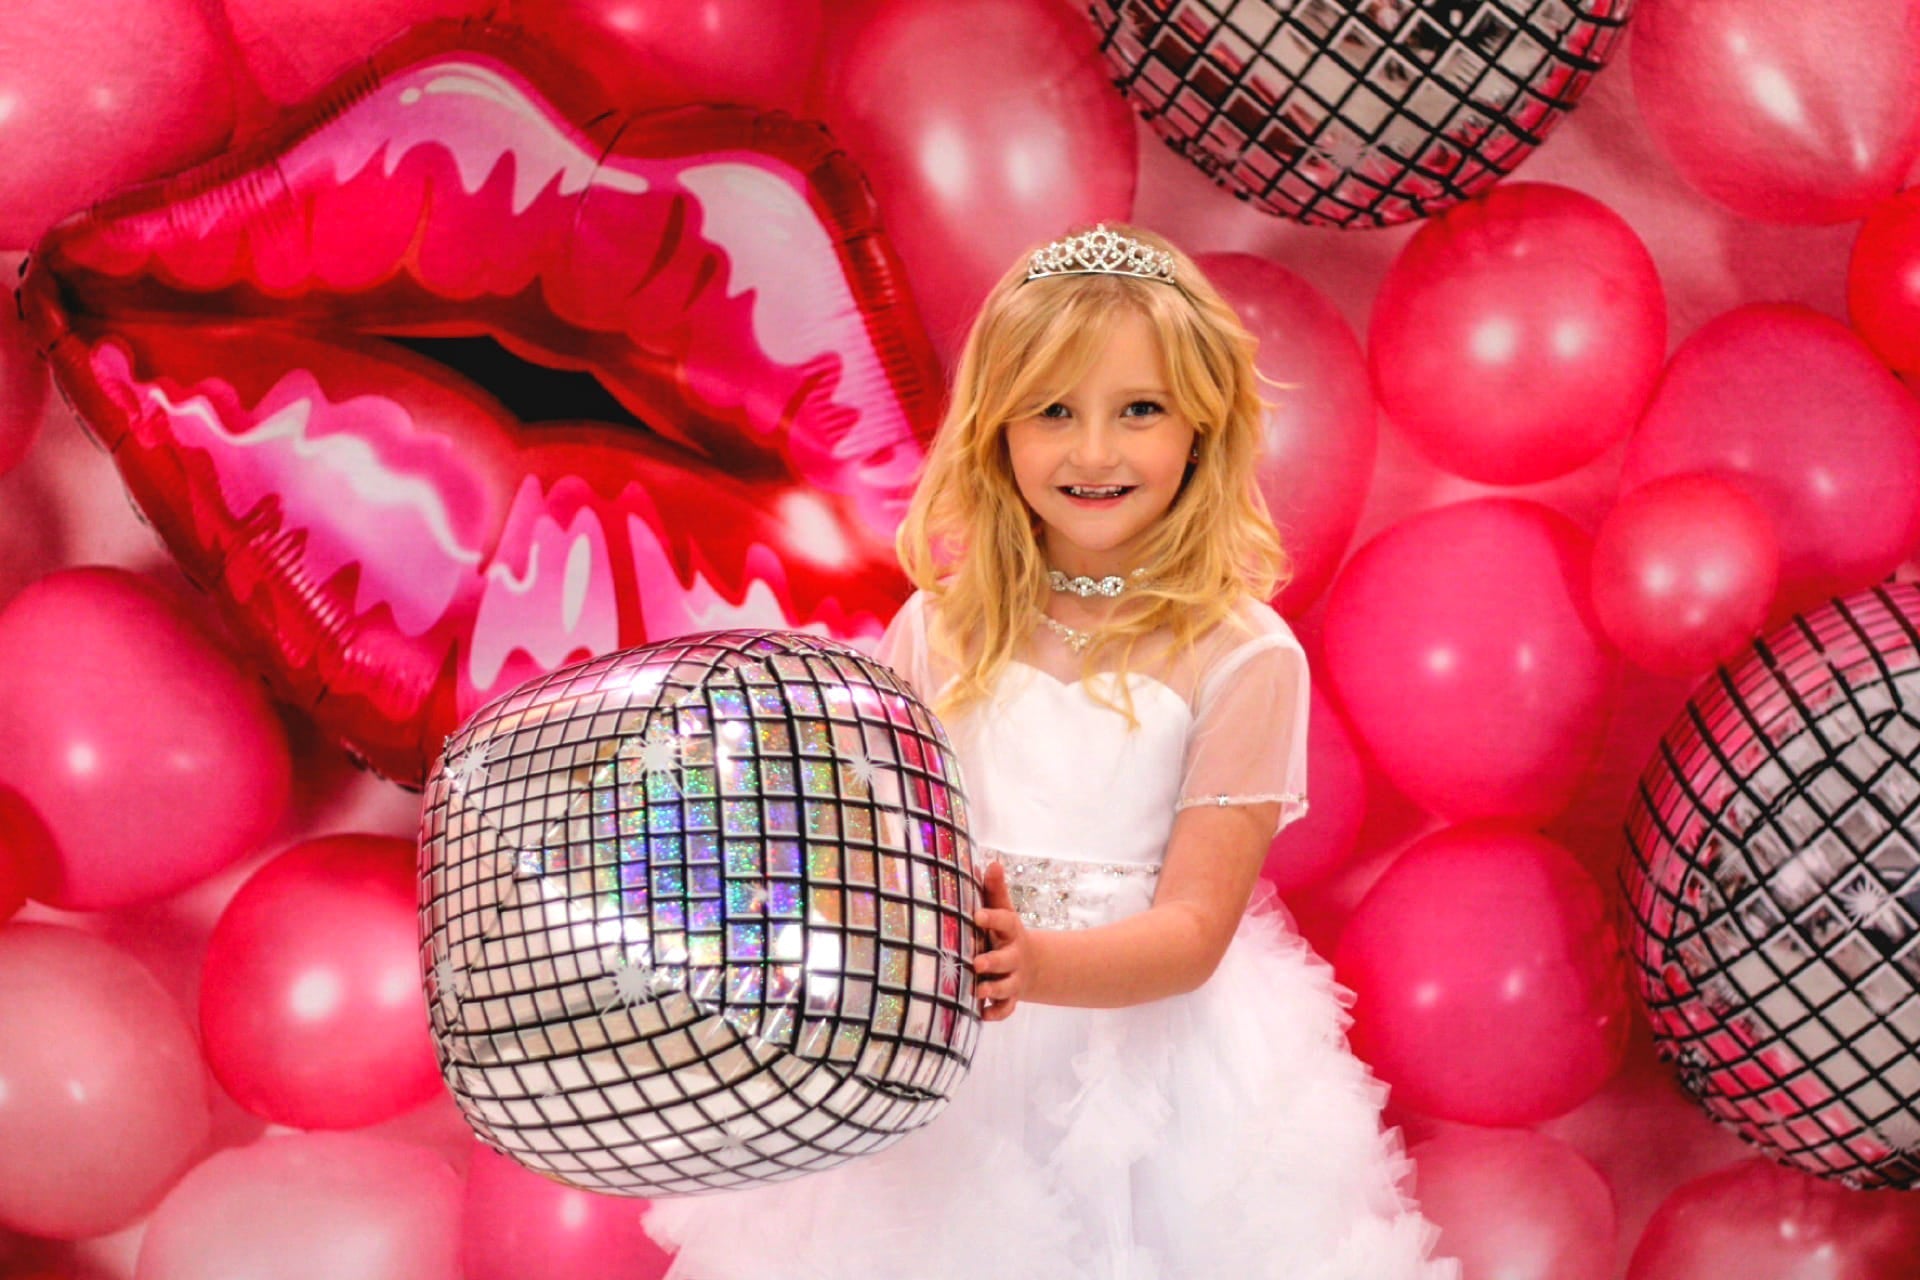 Kate Cake Smash Pink Doll Backdrop Designed by Emetselch (only ship to Canada)